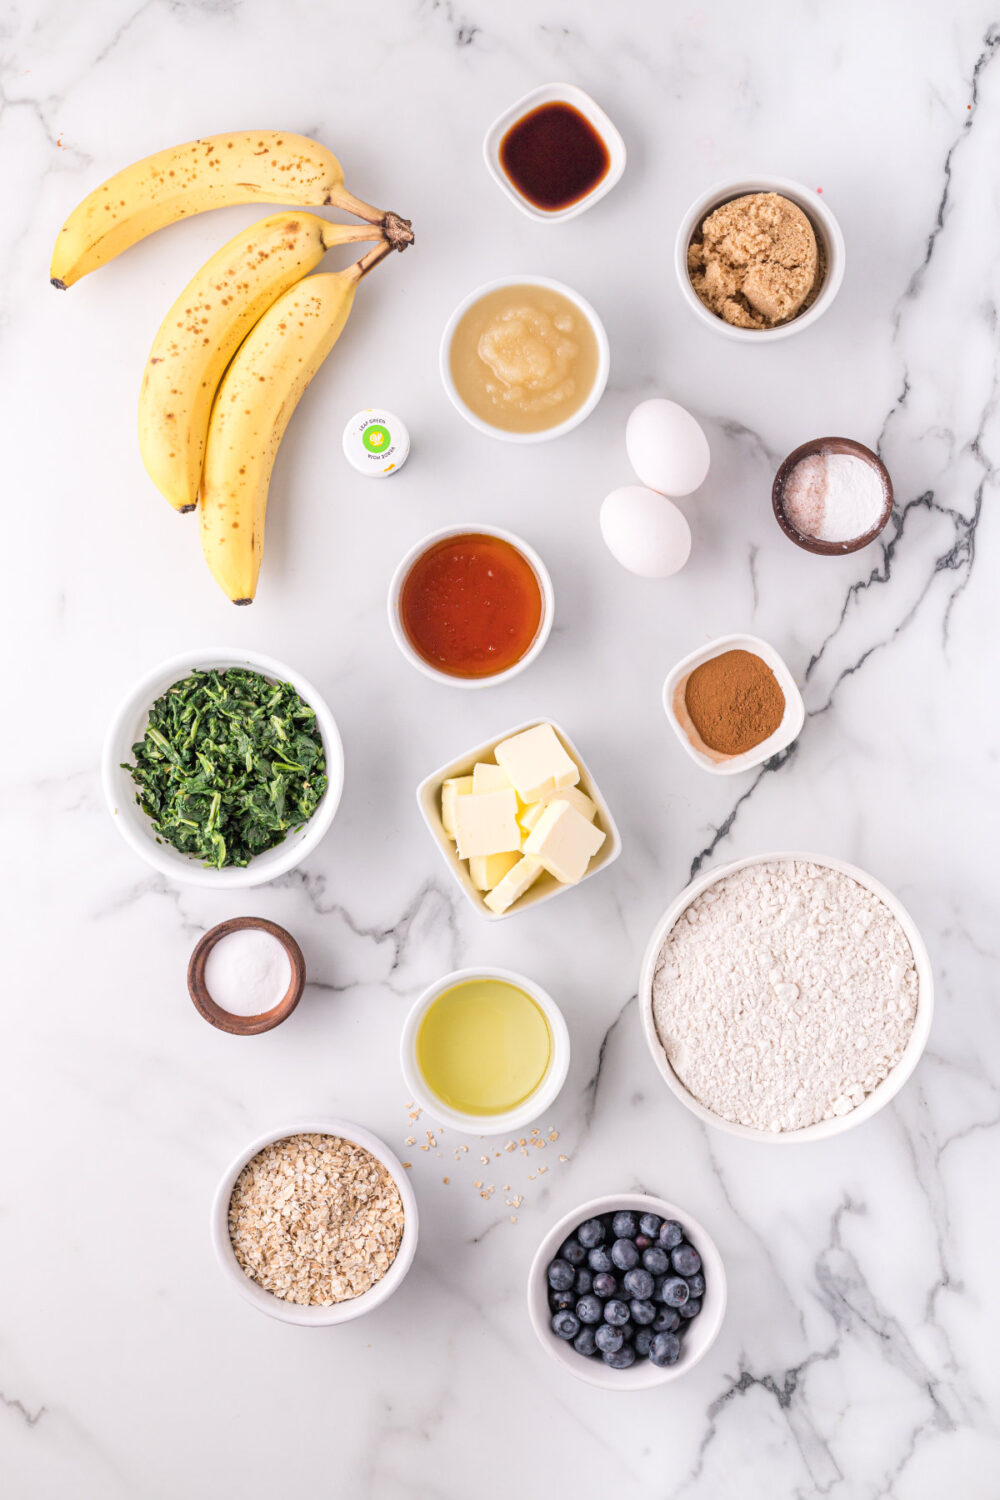 Bananas, spinach, blueberries, and other ingredients for muffins in bowls. 